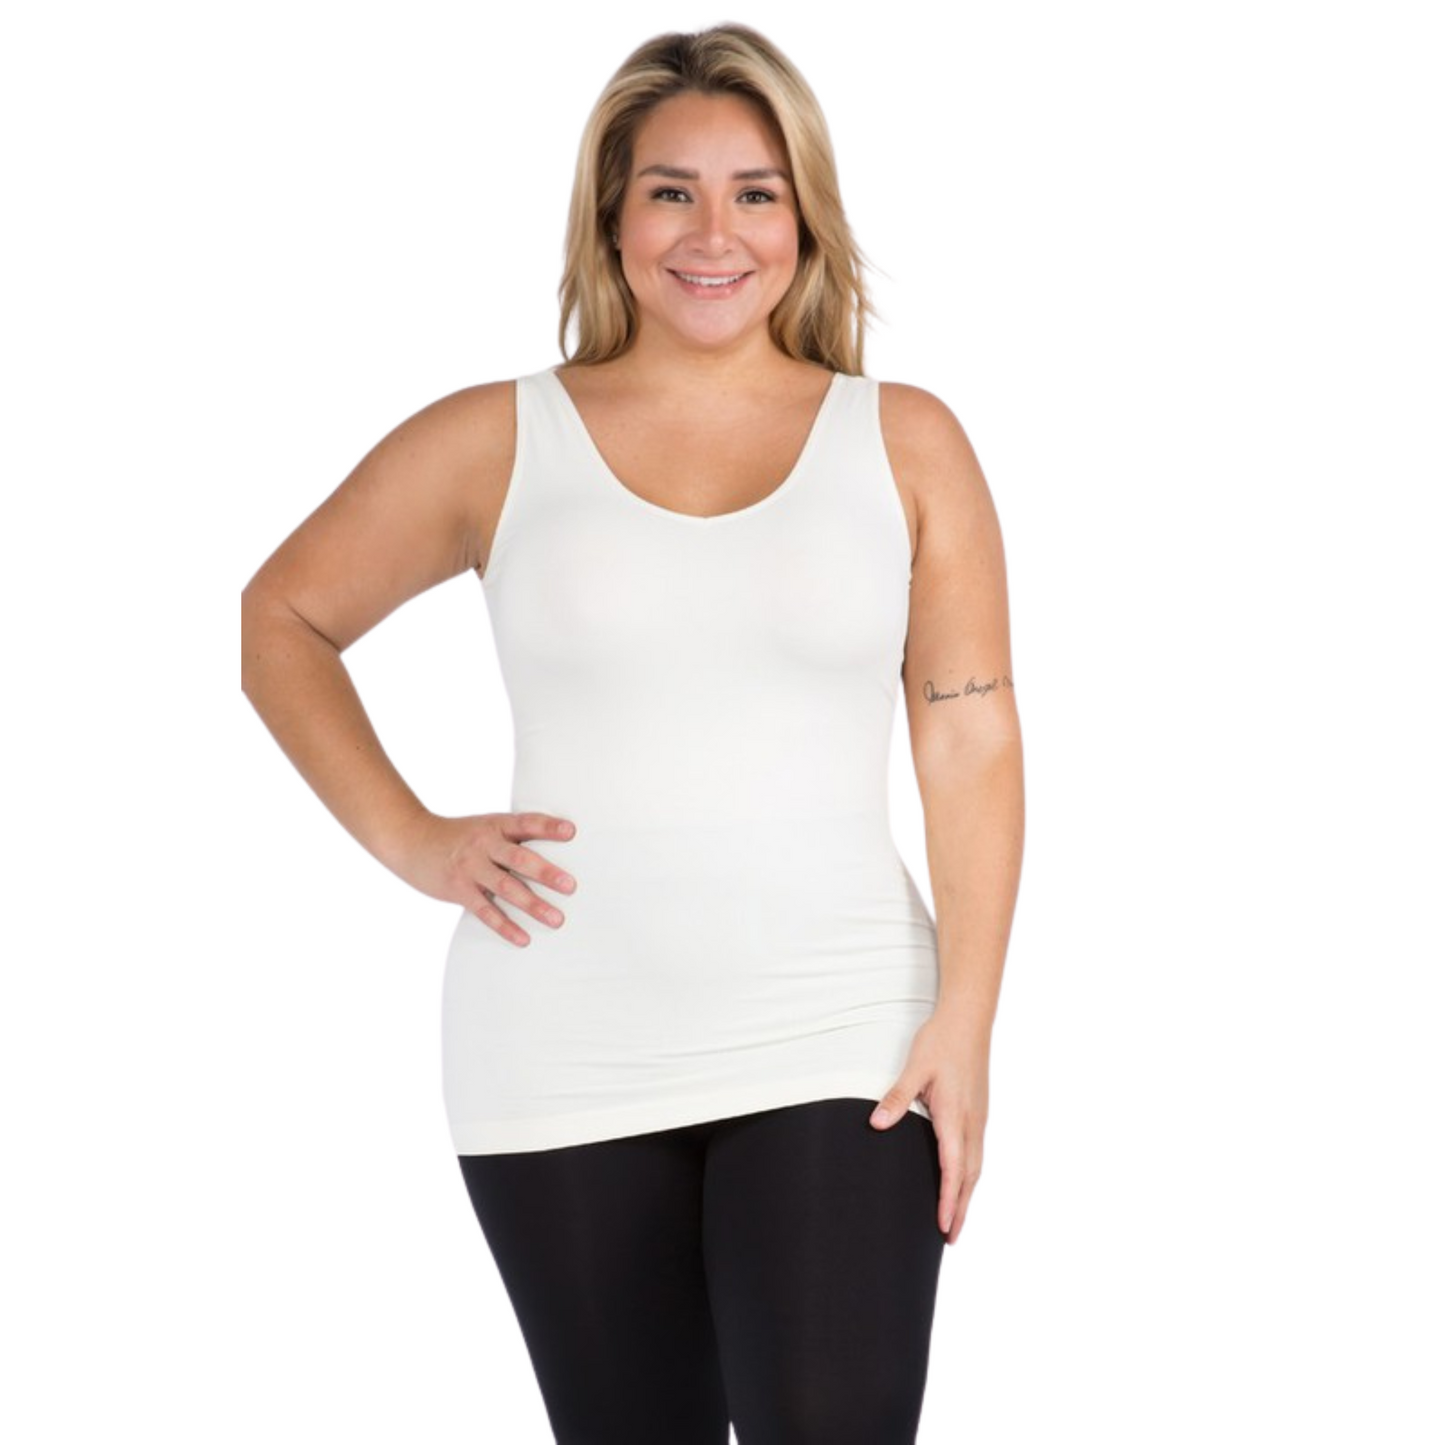 This Seamless Tank Top is the perfect fashion staple for any wardrobe. Constructed from butter soft material and featuring a variety of colors, this tank top is guaranteed to provide a comfortable fit that flatters everyone. One size fit most.